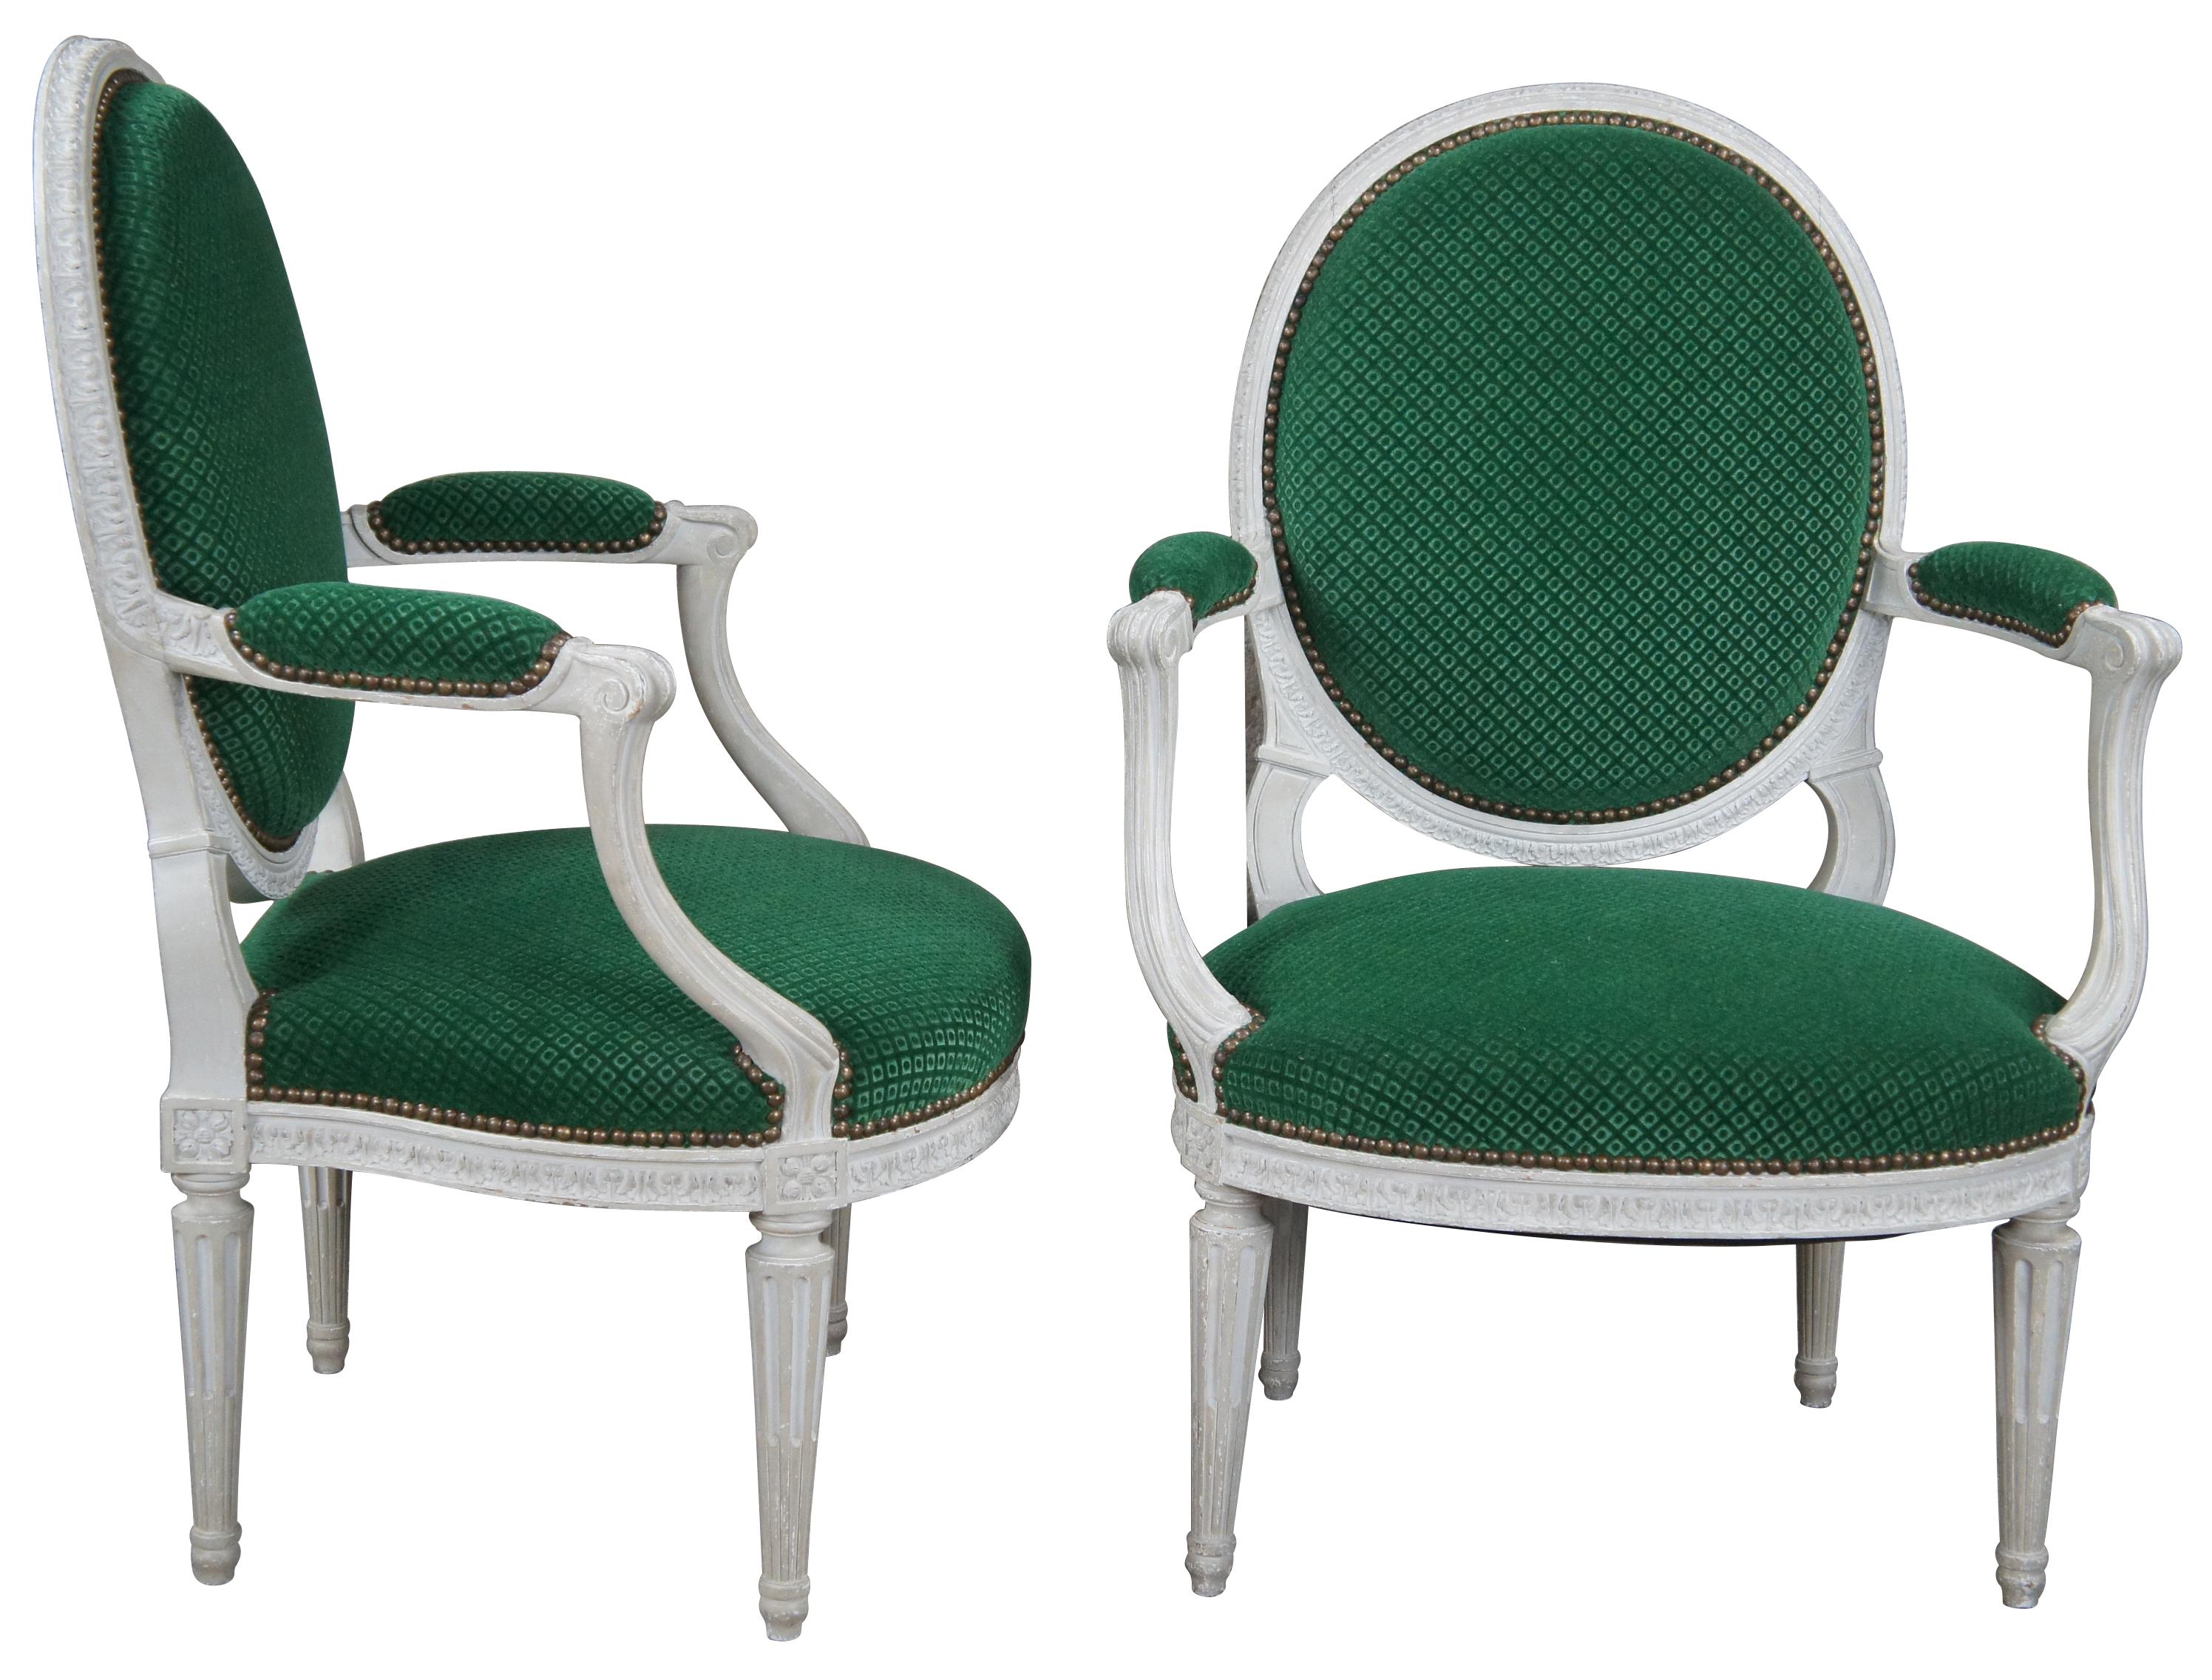 An elegant pair of English George III style open arm chair, circa 1960s. Features a balloon back, scrolled padded arms and tapered fluted legs. The chairs are trimmed with acanthus moldings, upholstered in a green diamond fabric and finished with